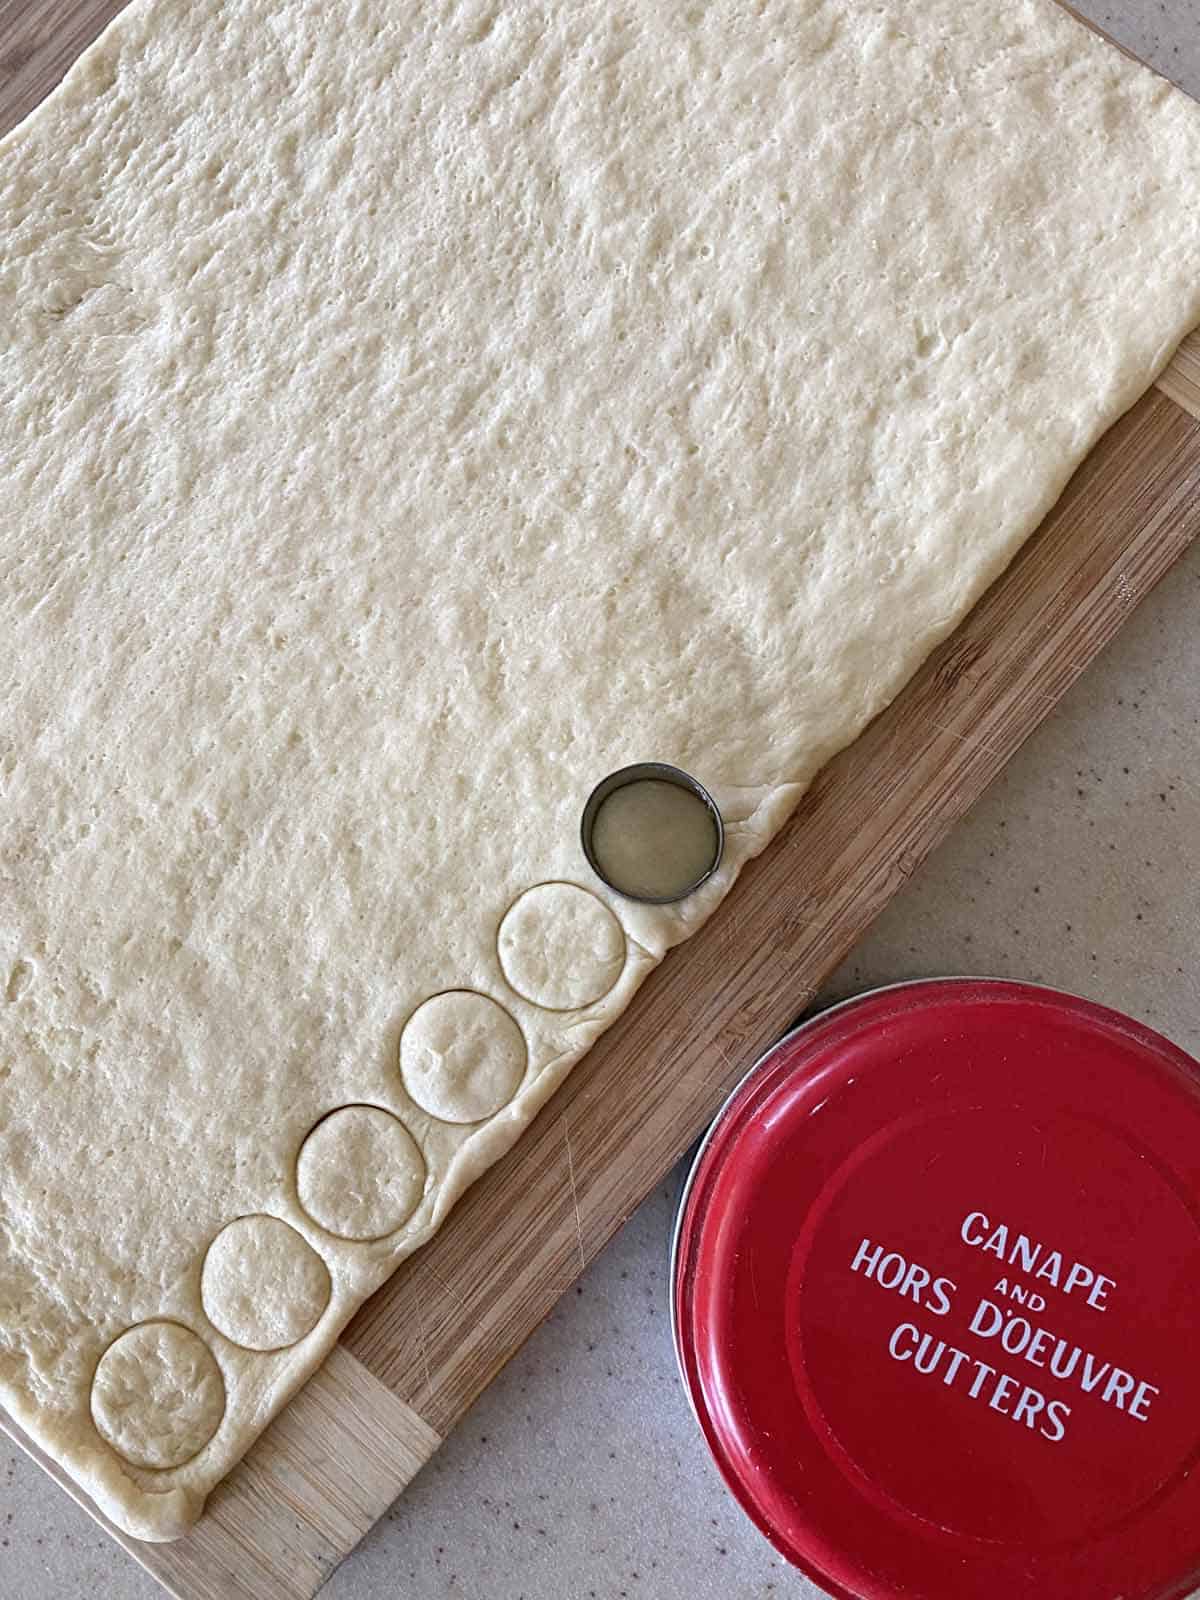 6 round circles cut into crescent dough, with a small red container marked "Canape and Hors D'oeuvre Cutters" in the lower right corner. 